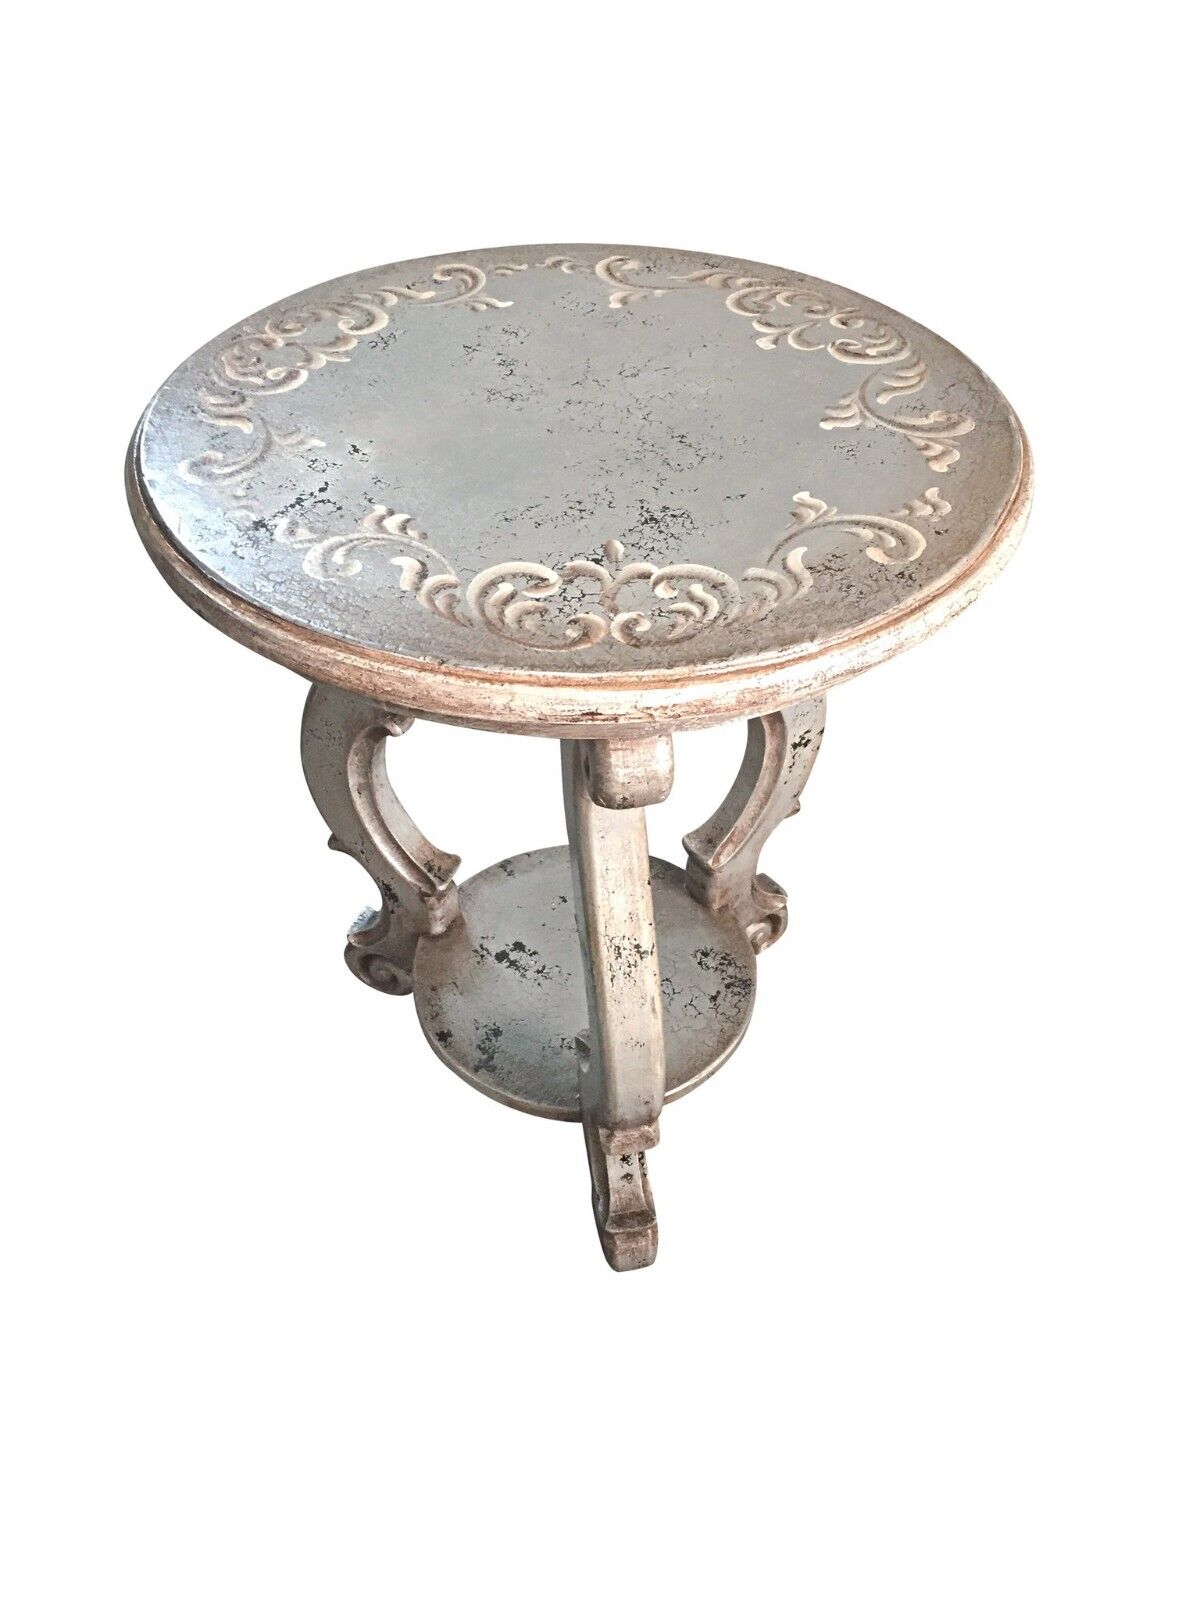 Esofastore Marbella Traditional End Table, French Style Accent Table w/ Bottom Shelf, Antique Round End Table, Floral Hand Carvings, Silver